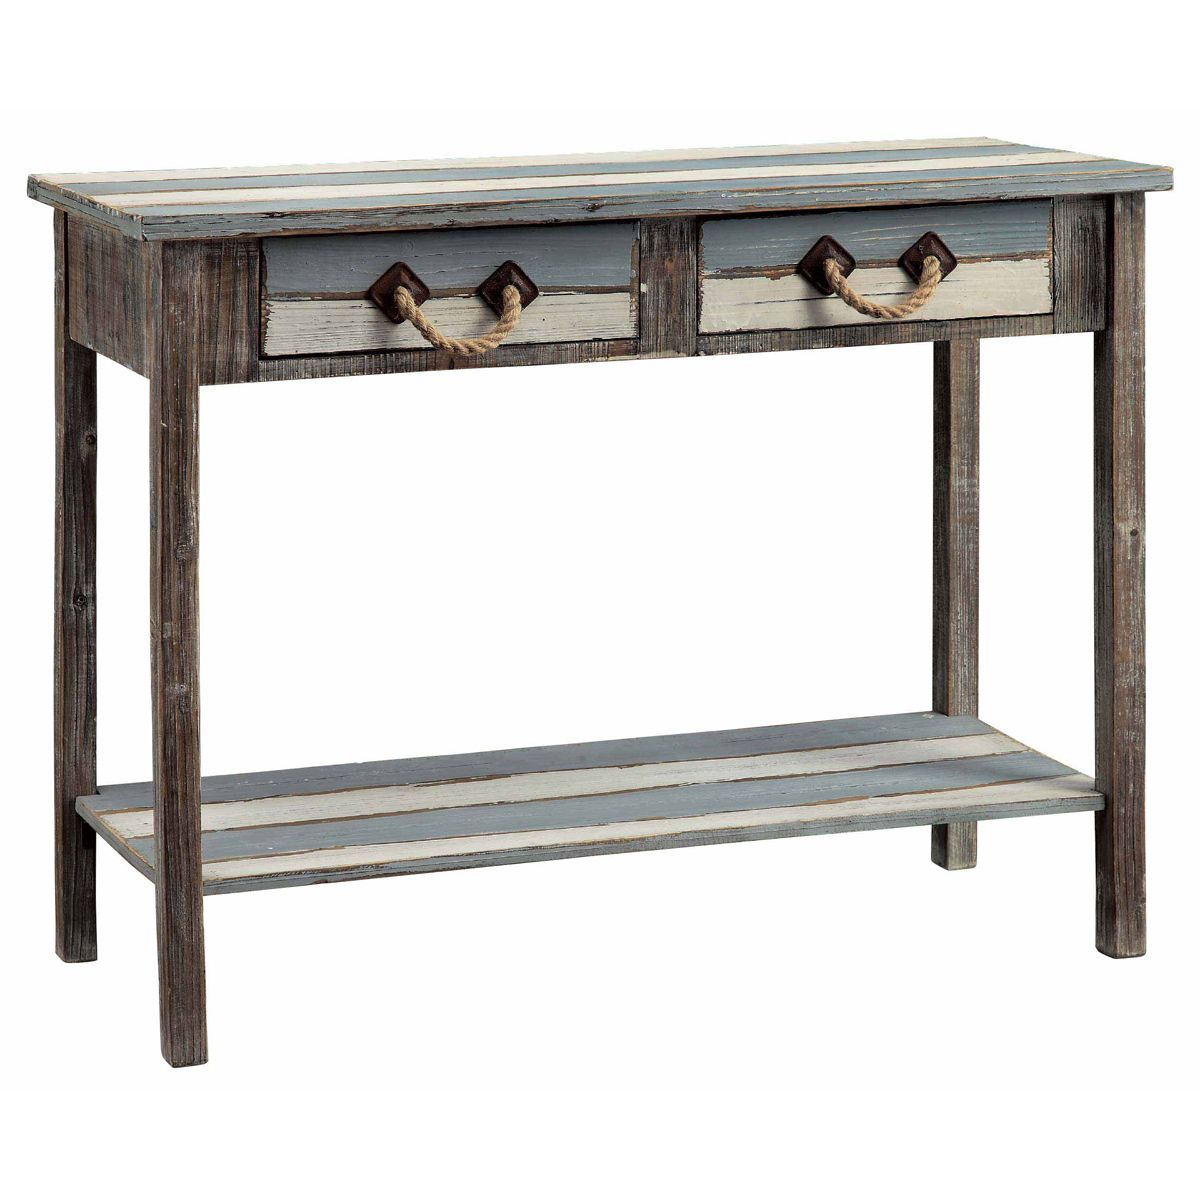 Nautical Tables: Nantucket 2 Drawer Weathered Wood Console Throughout Square Weathered White Wood Console Tables (View 16 of 20)